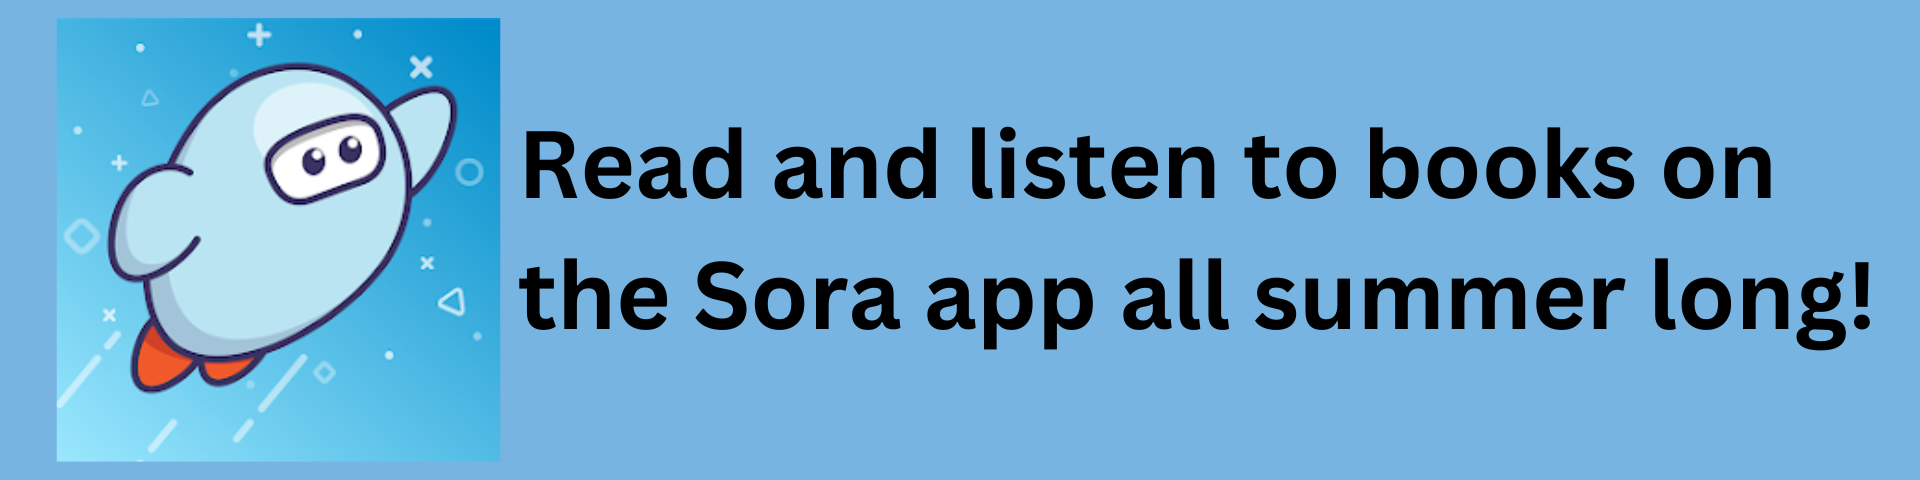 Sora logo with text reading: Read and listen to books on the Sora app all summer long!